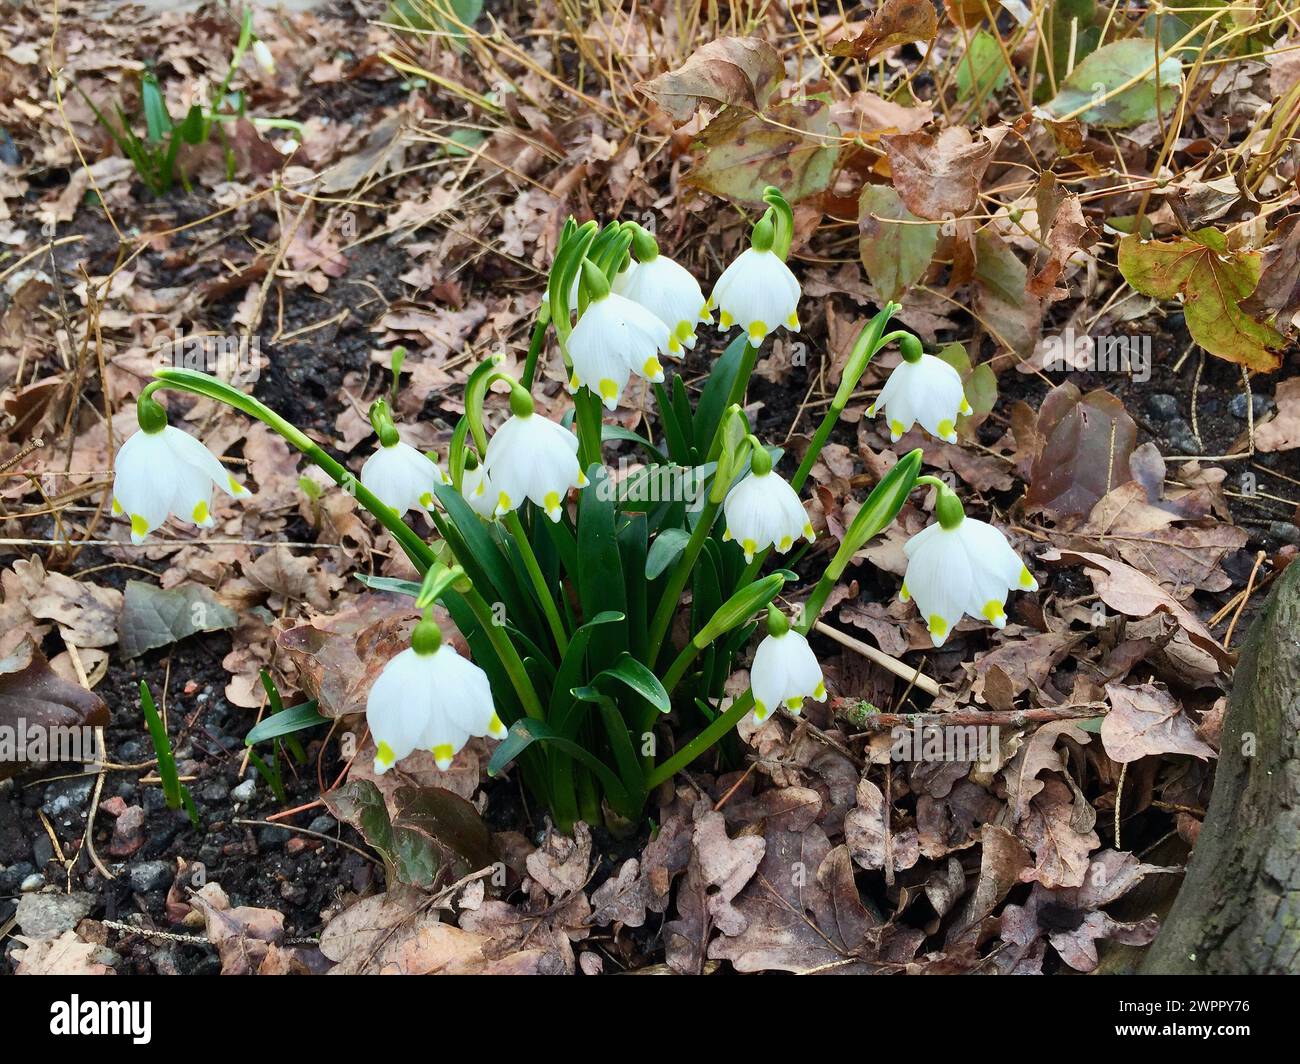 Group of flowering white Spring snowflakes among brown fall leaves outdoors in early spring in Sweden. Stock Photo